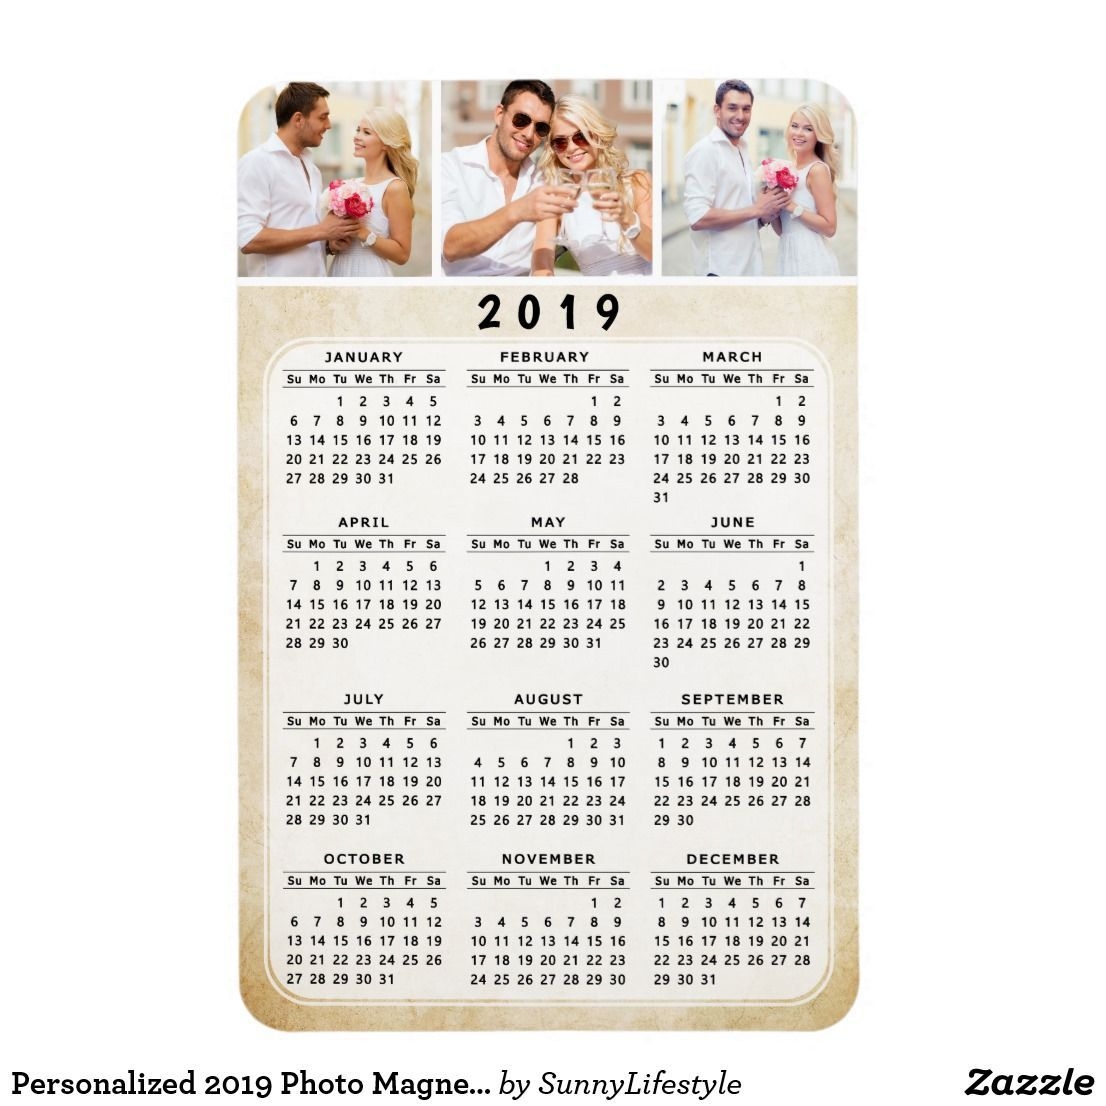 personalized 2019 photo magnet calendar 4x6 | magnetic